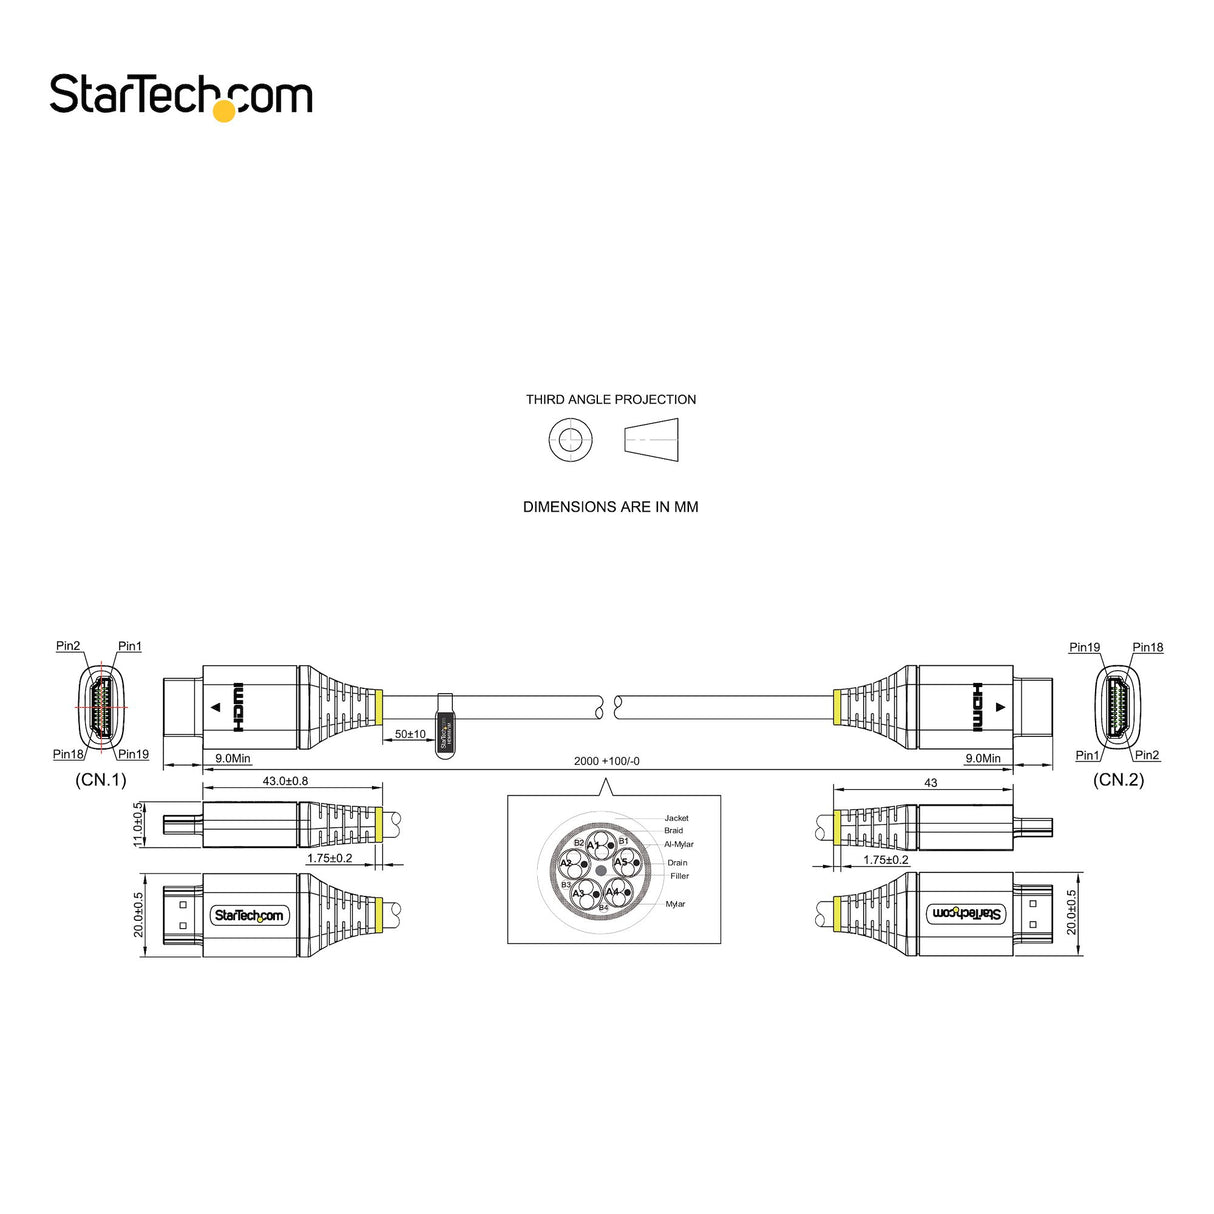 STARTECH 6ft (2m) Premium Certified HDMI 2.0 Cable - High Speed Ultra HD 4K 60Hz HDMI Cable with Ethernet - HDR10 | ARC - UHD HDMI Video Cord - For UHD Monitors | TVs | Displays - M|M (HDMMV2M) (HDMMV2M)